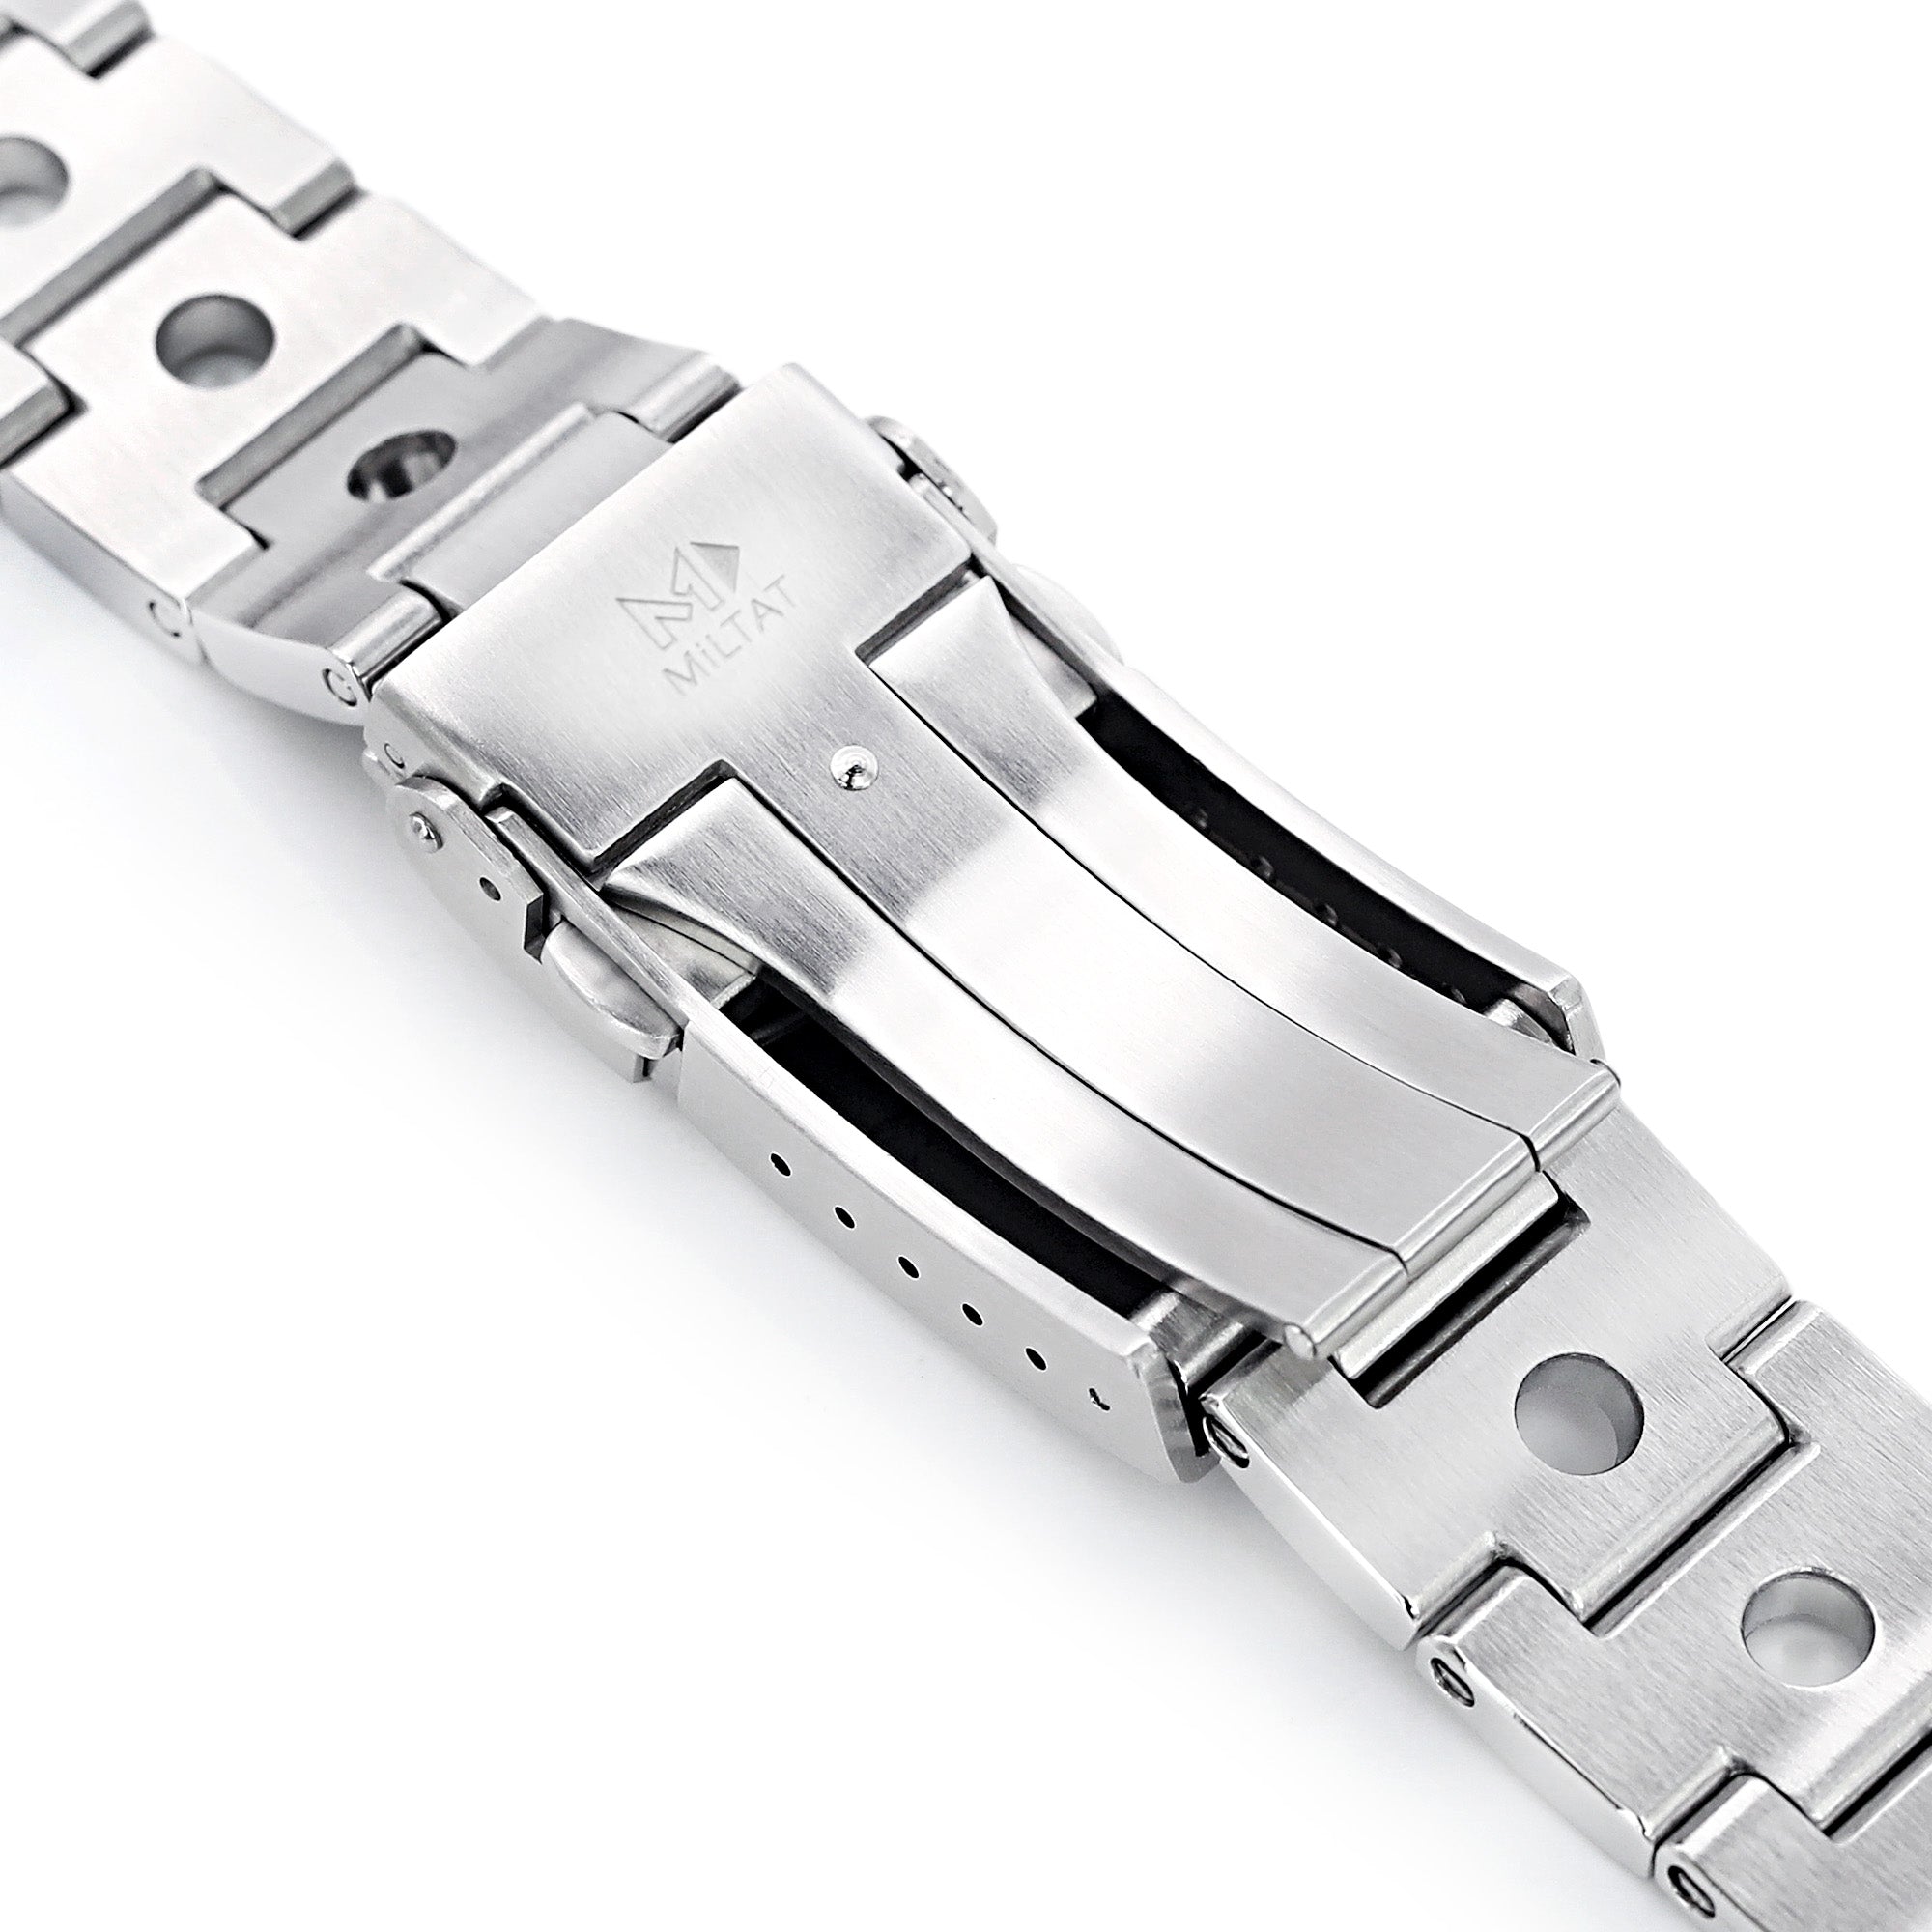 22mm Rollball Watch Band compatible with Seiko New Turtles SRP777, 316L Stainless Steel Brushed V-Clasp